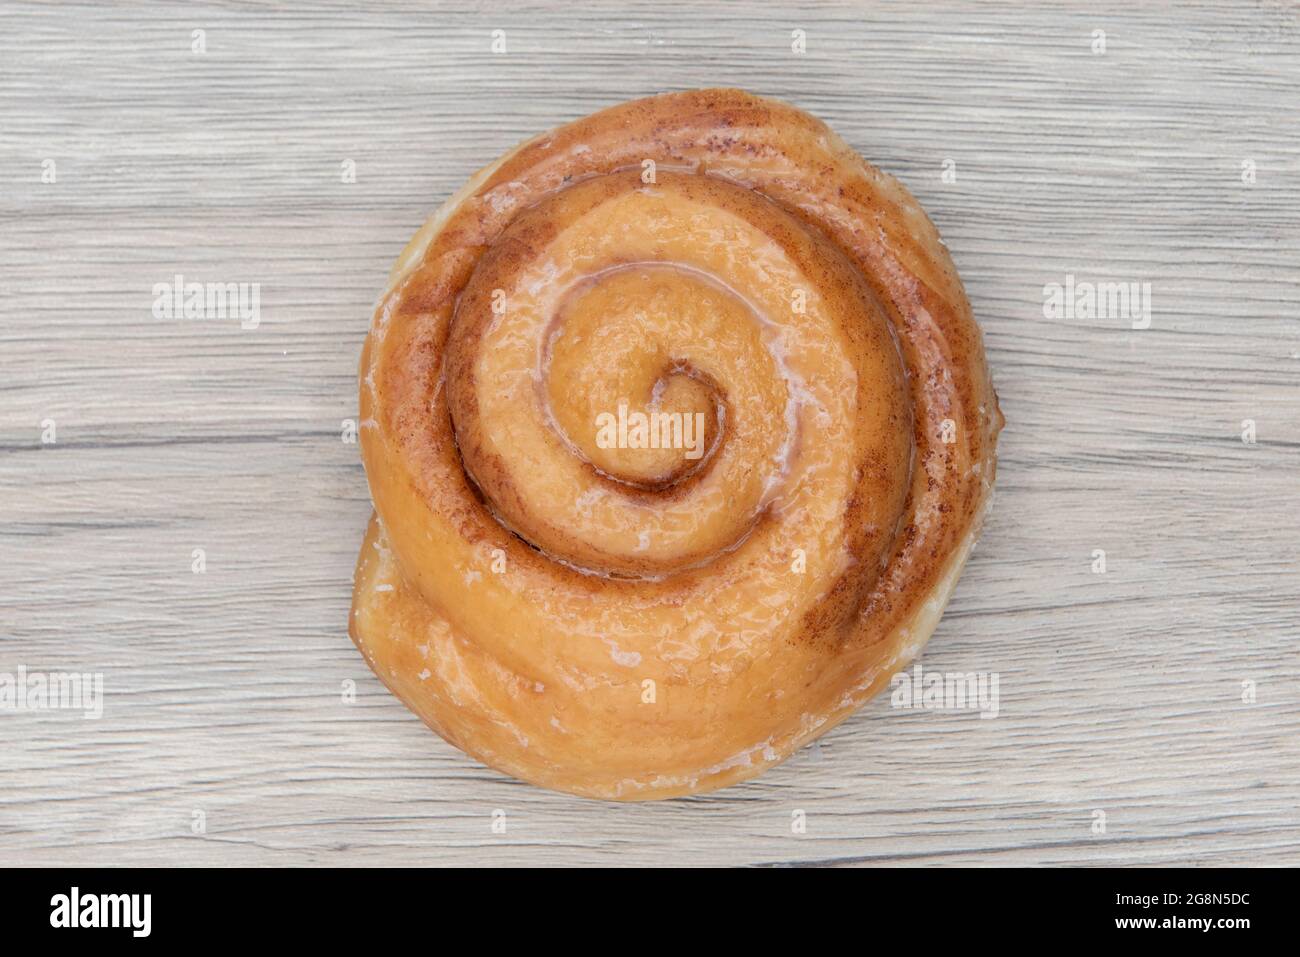 Overhead view of cinnamon roll donut is textured with glazed coating for a sweet treat delight. Stock Photo